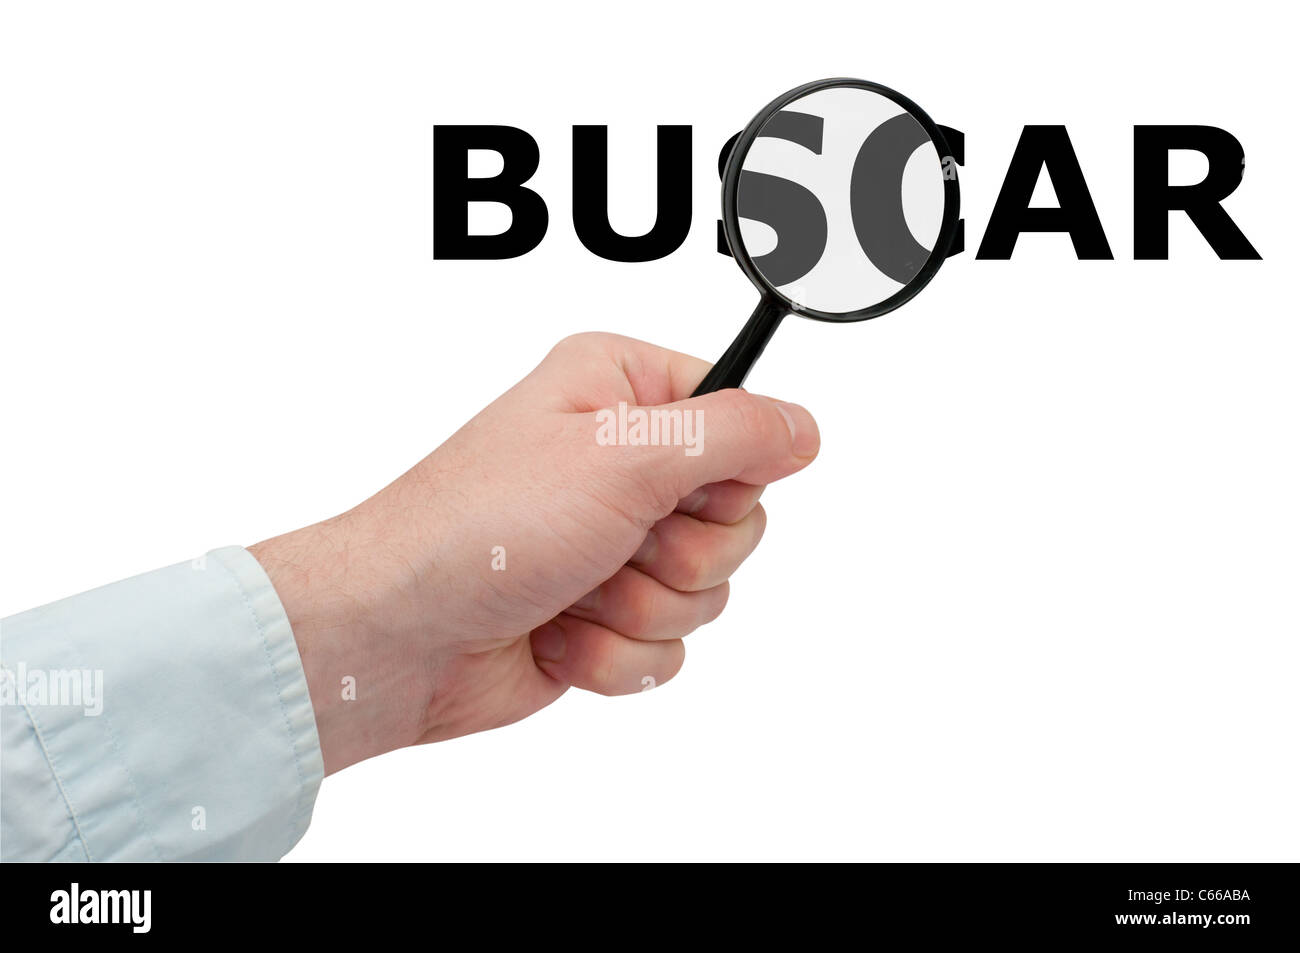 Searching - Man's Hand Holding Magnifying Glass and Search / Buscar Sign - Spanish Version Stock Photo